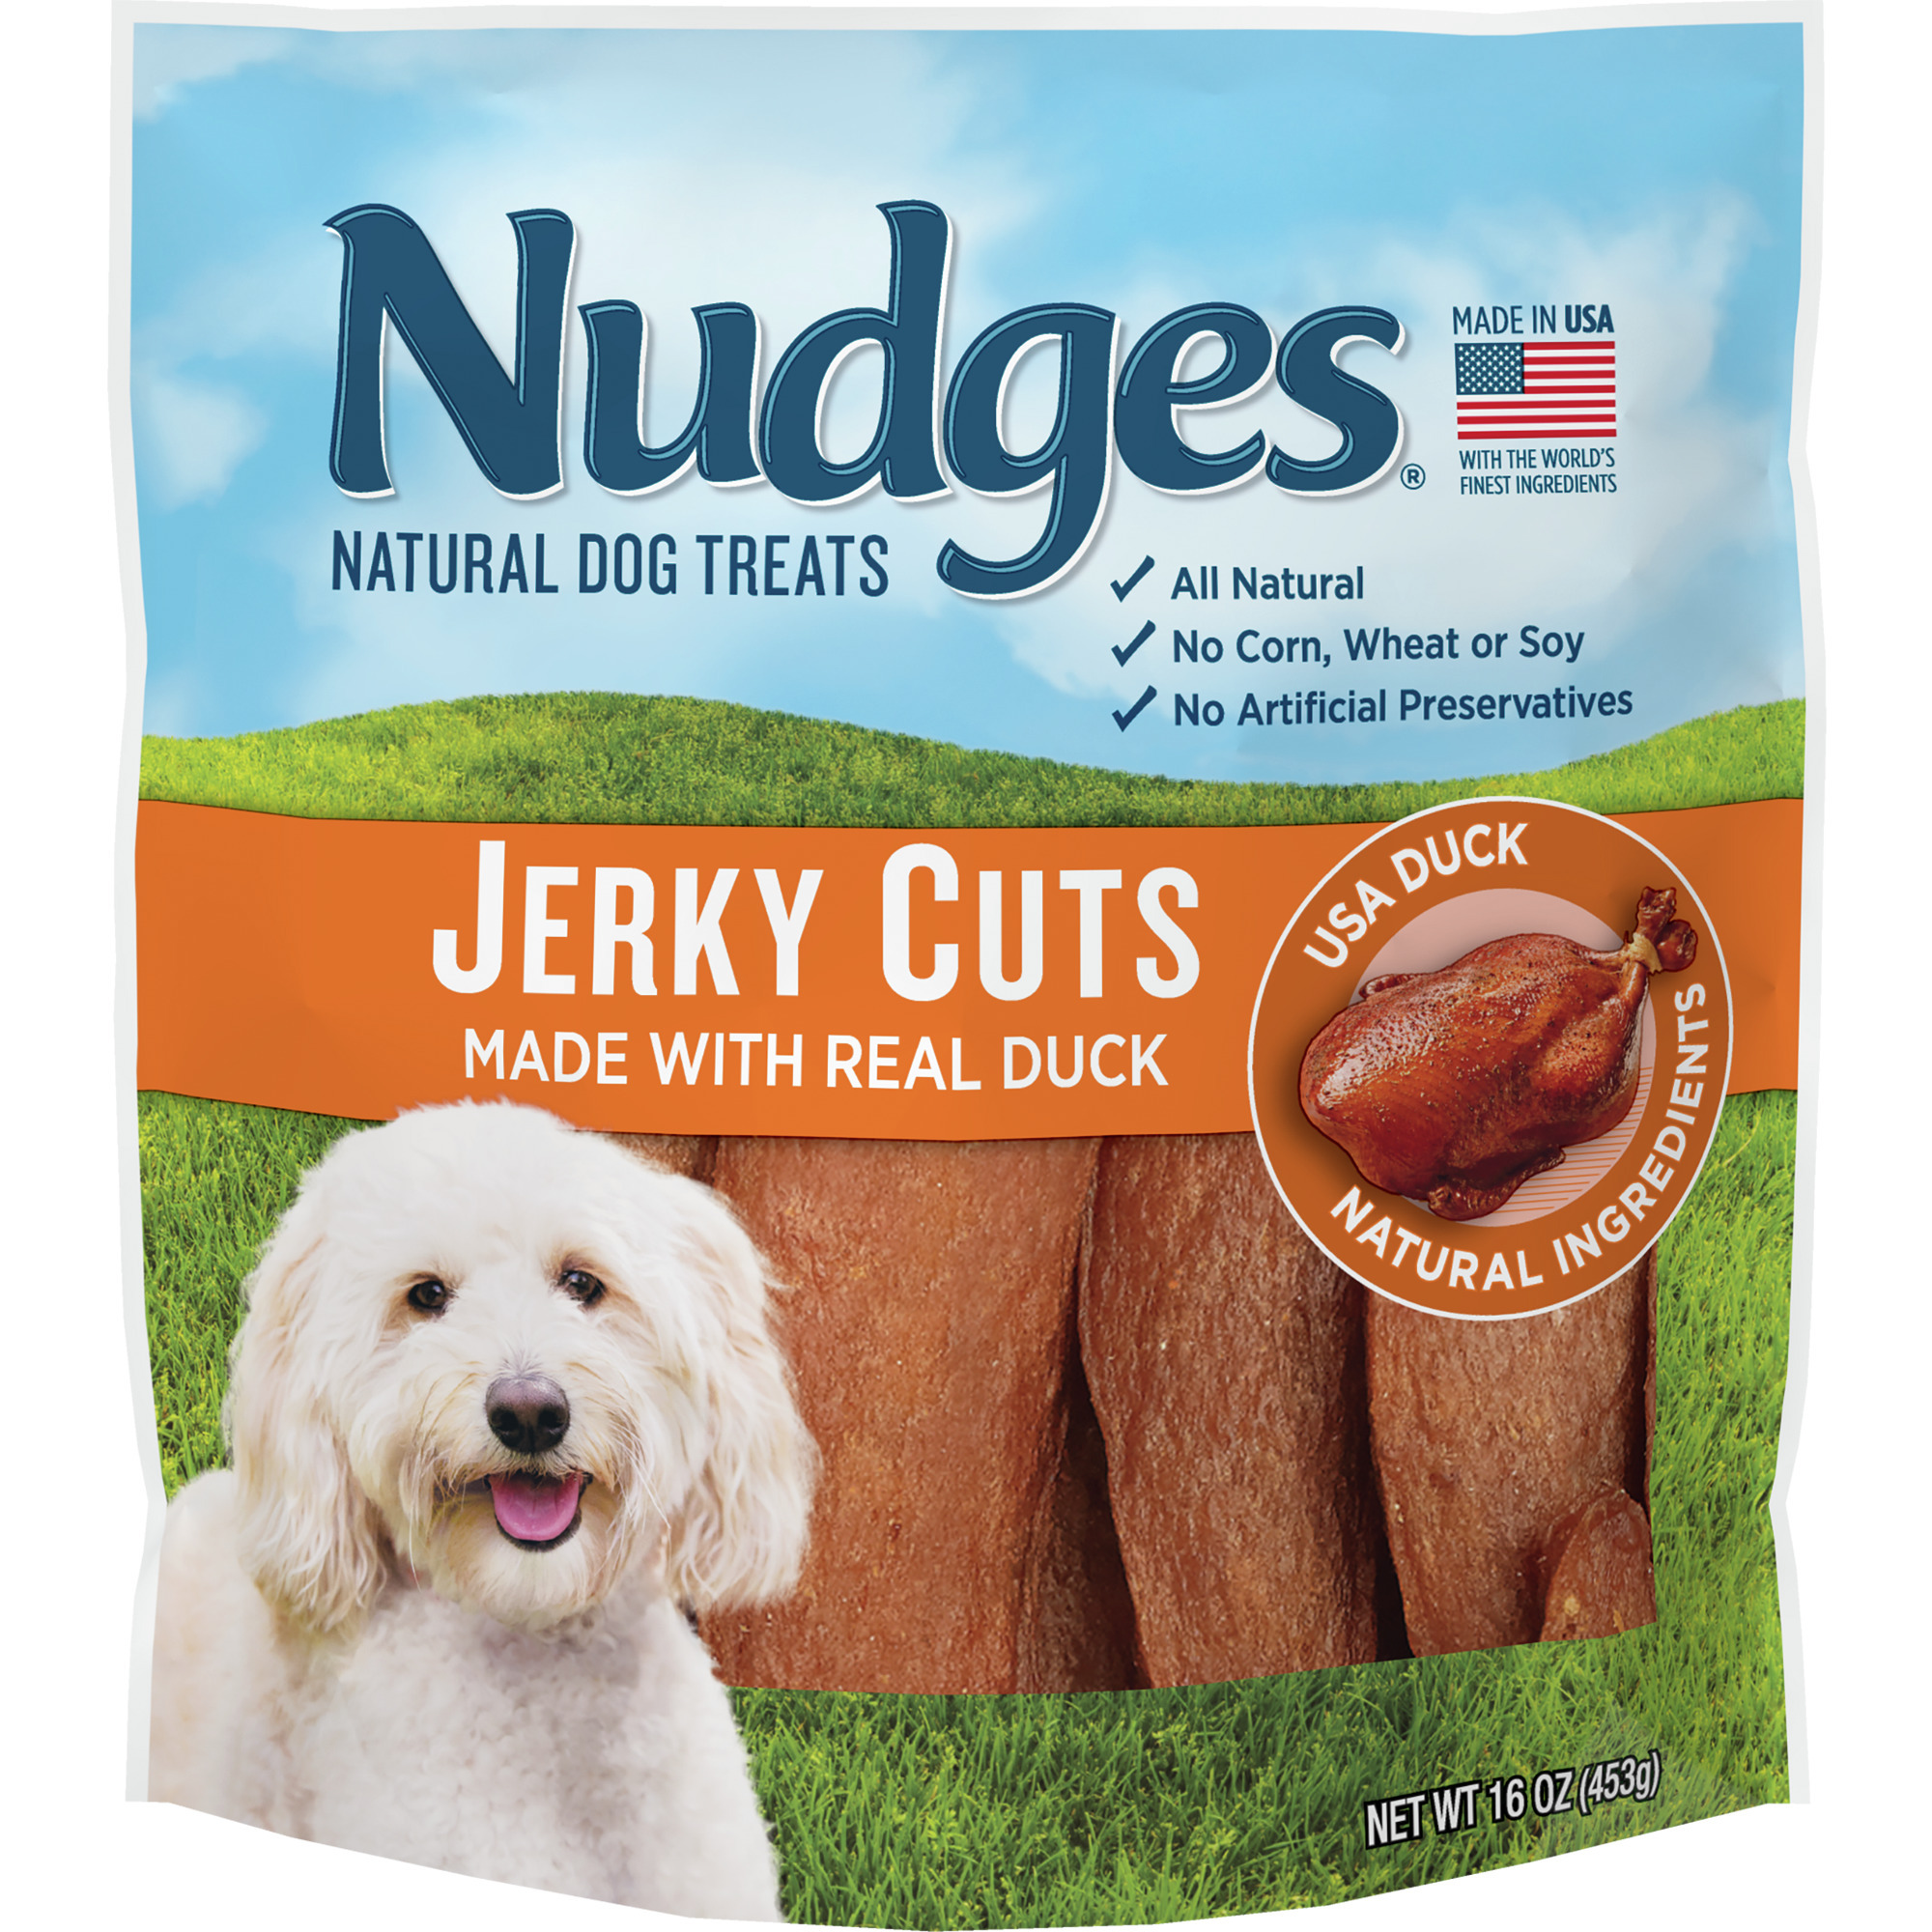 Blue Buffalo Nudges Jerky Cuts Natural Dog Treats, Chicken and Duck, 16oz Bag - image 1 of 3